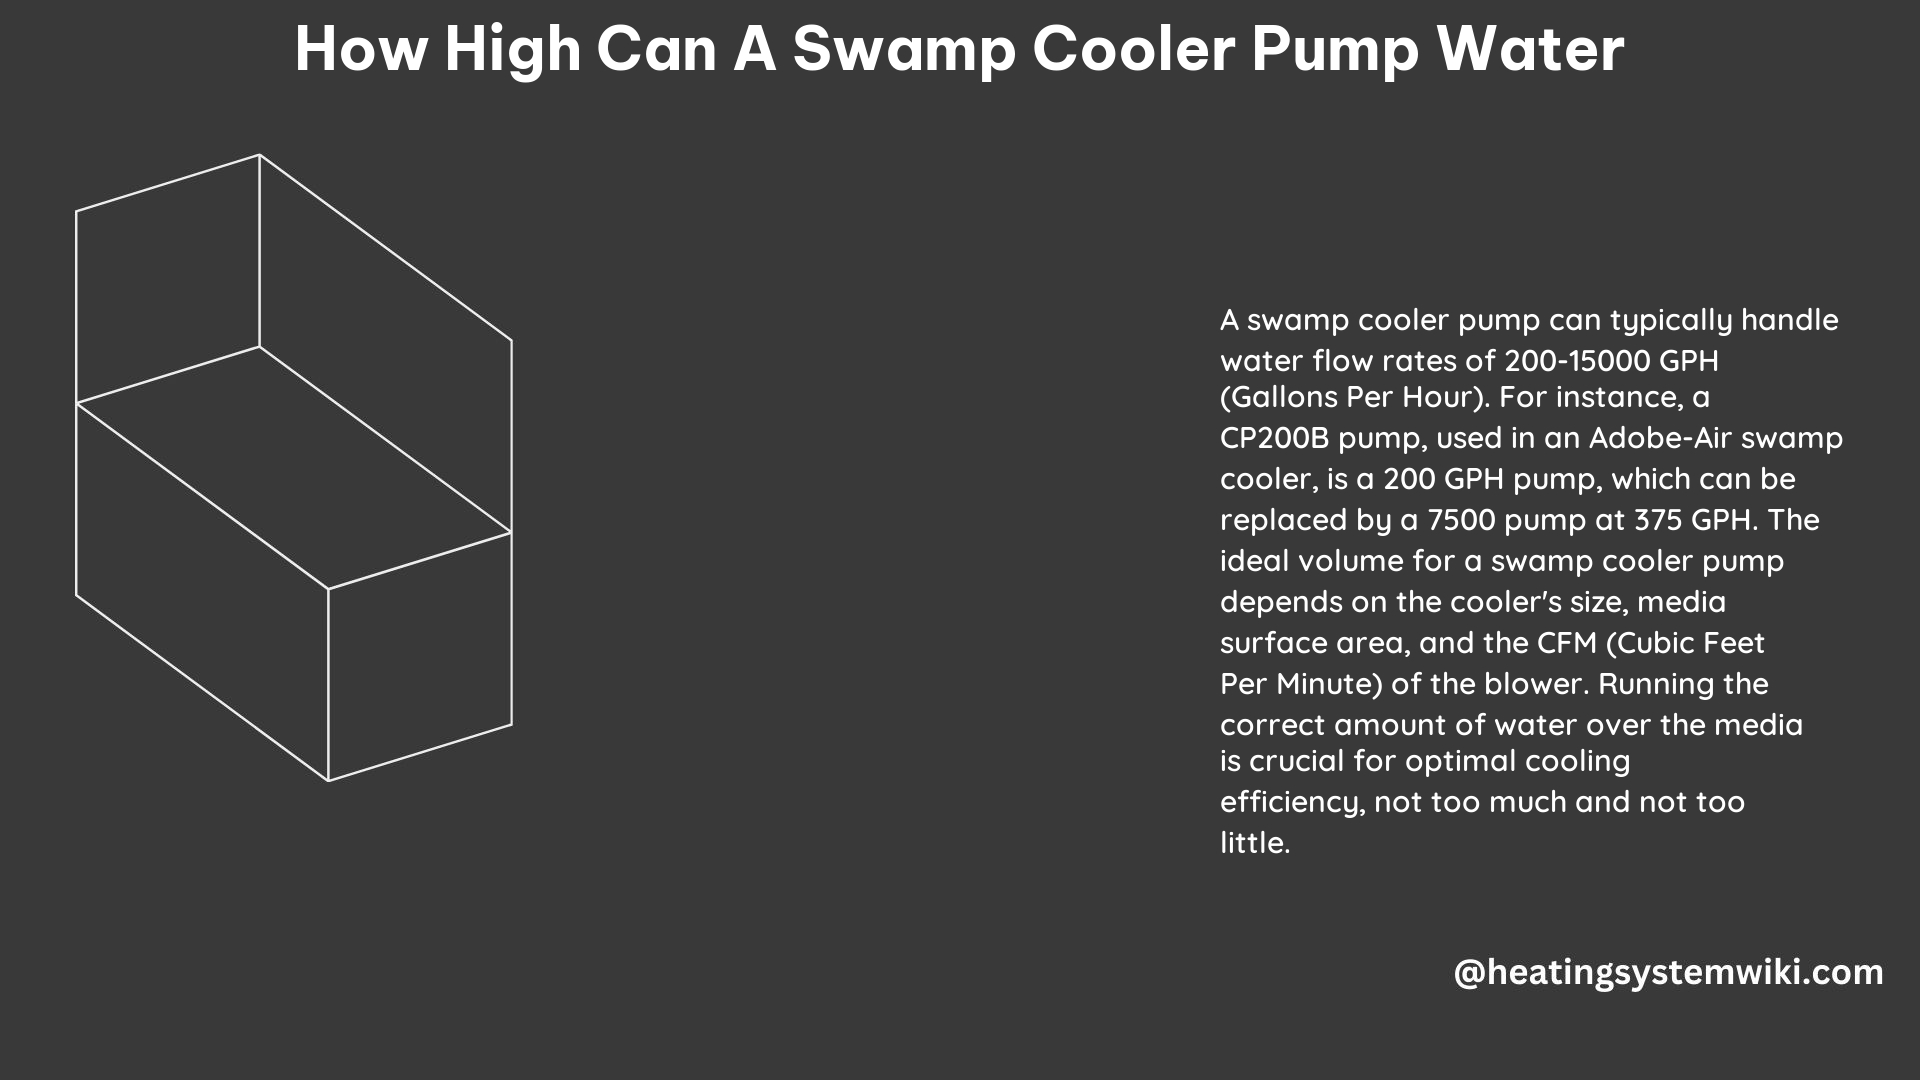 How High Can a Swamp Cooler Pump Water